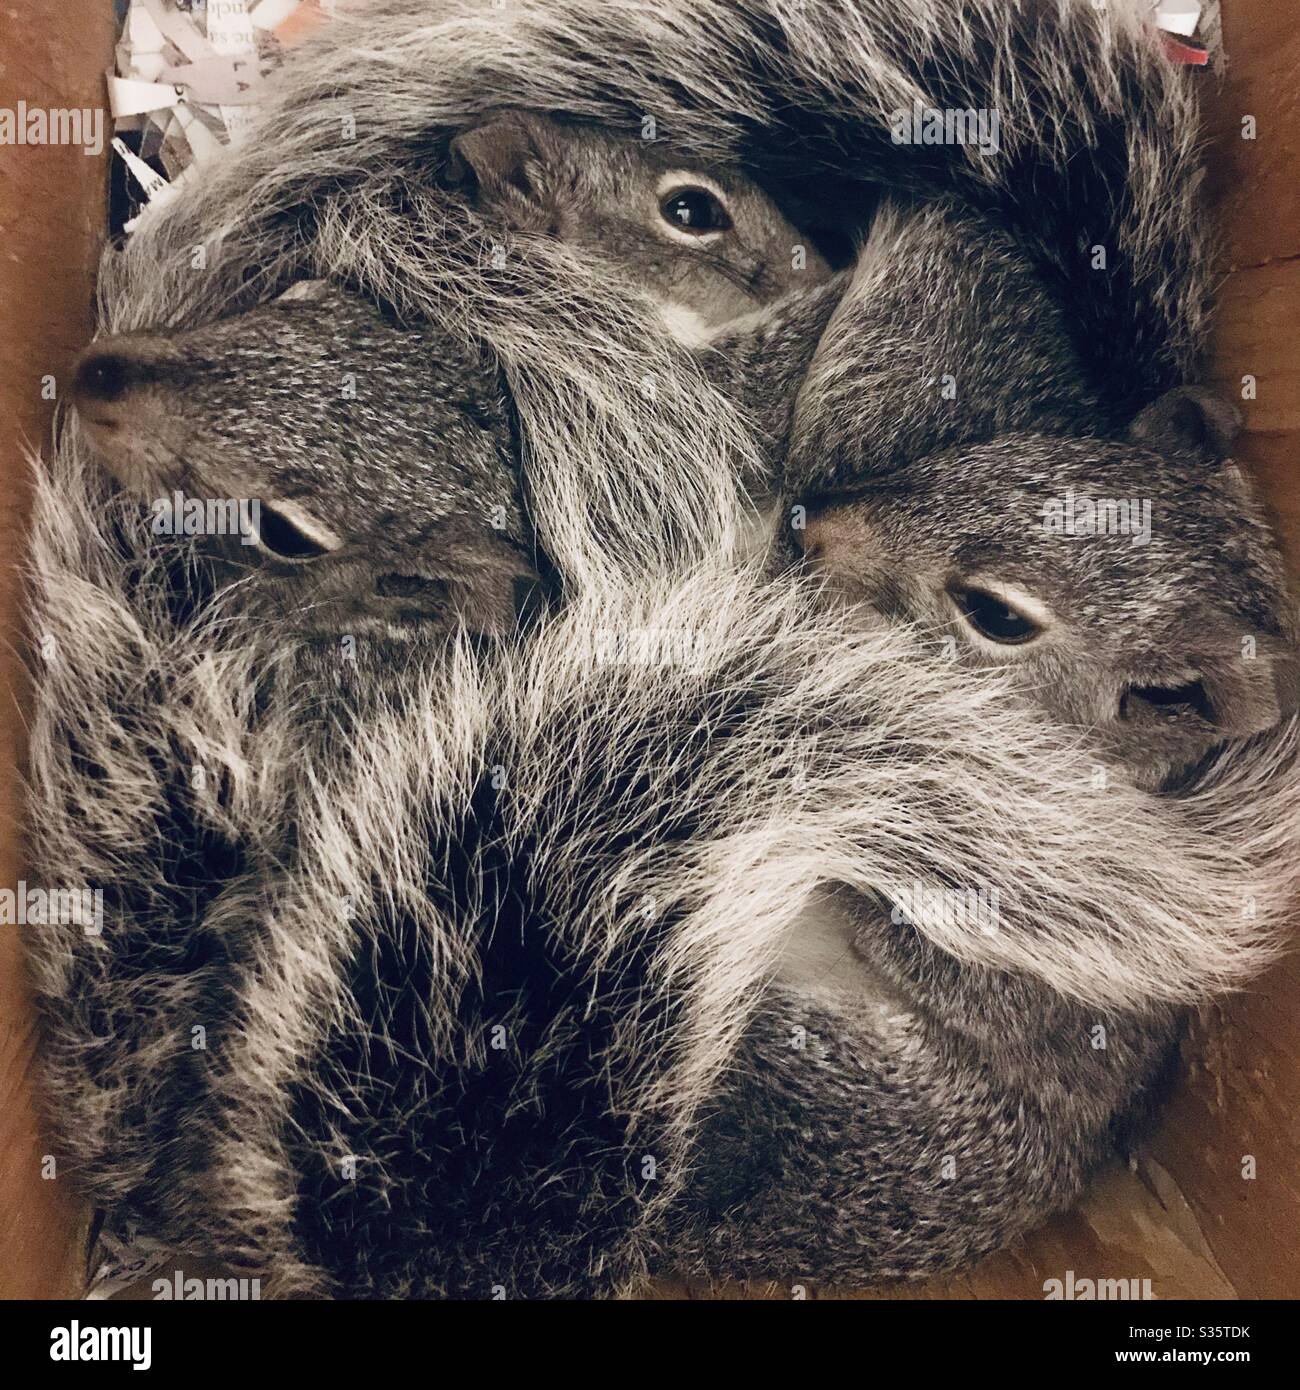 Three baby grey rescue squirrels snuggle together in their nesting box before being released. Stock Photo